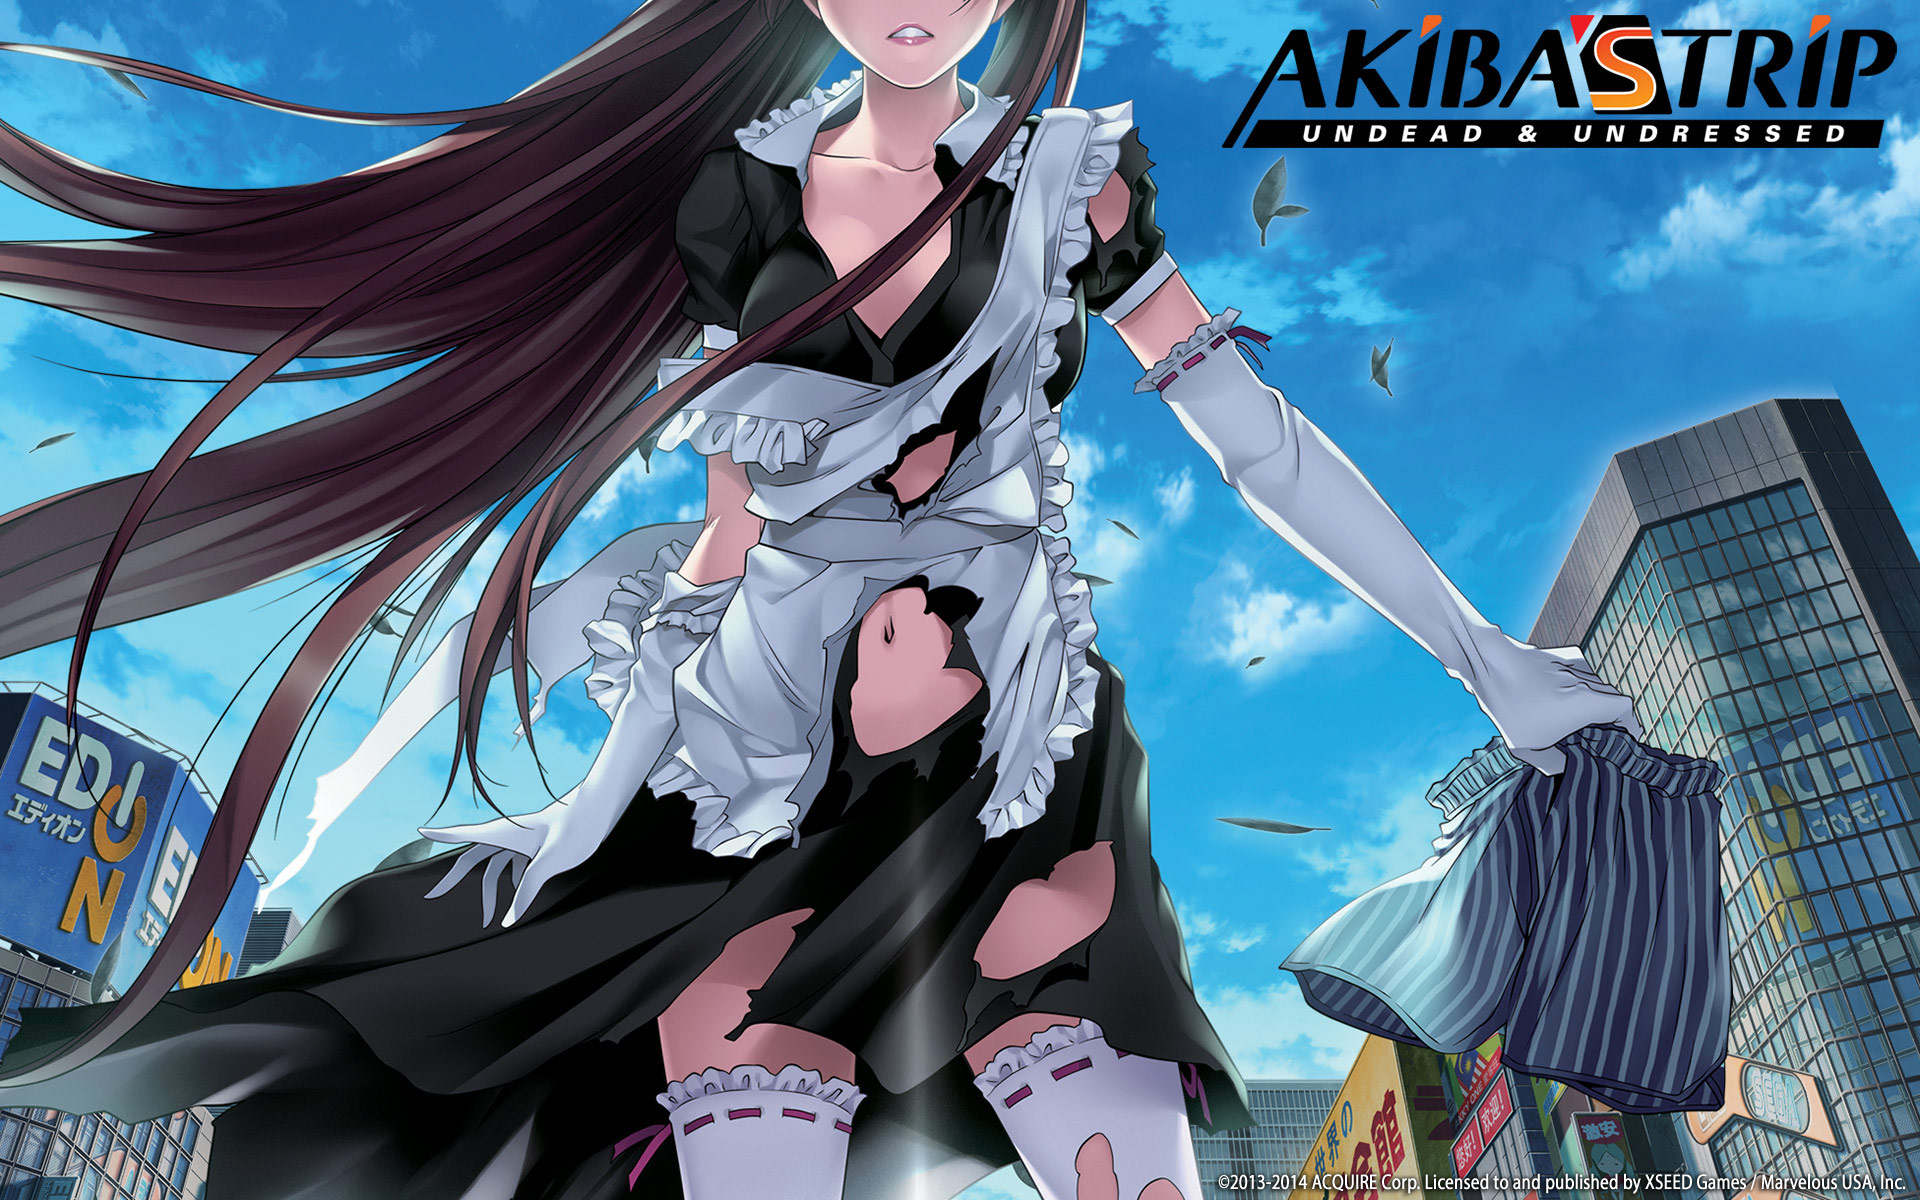 Amazing AKIBA'S TRIP: Undead & Undressed Pictures & Backgrounds